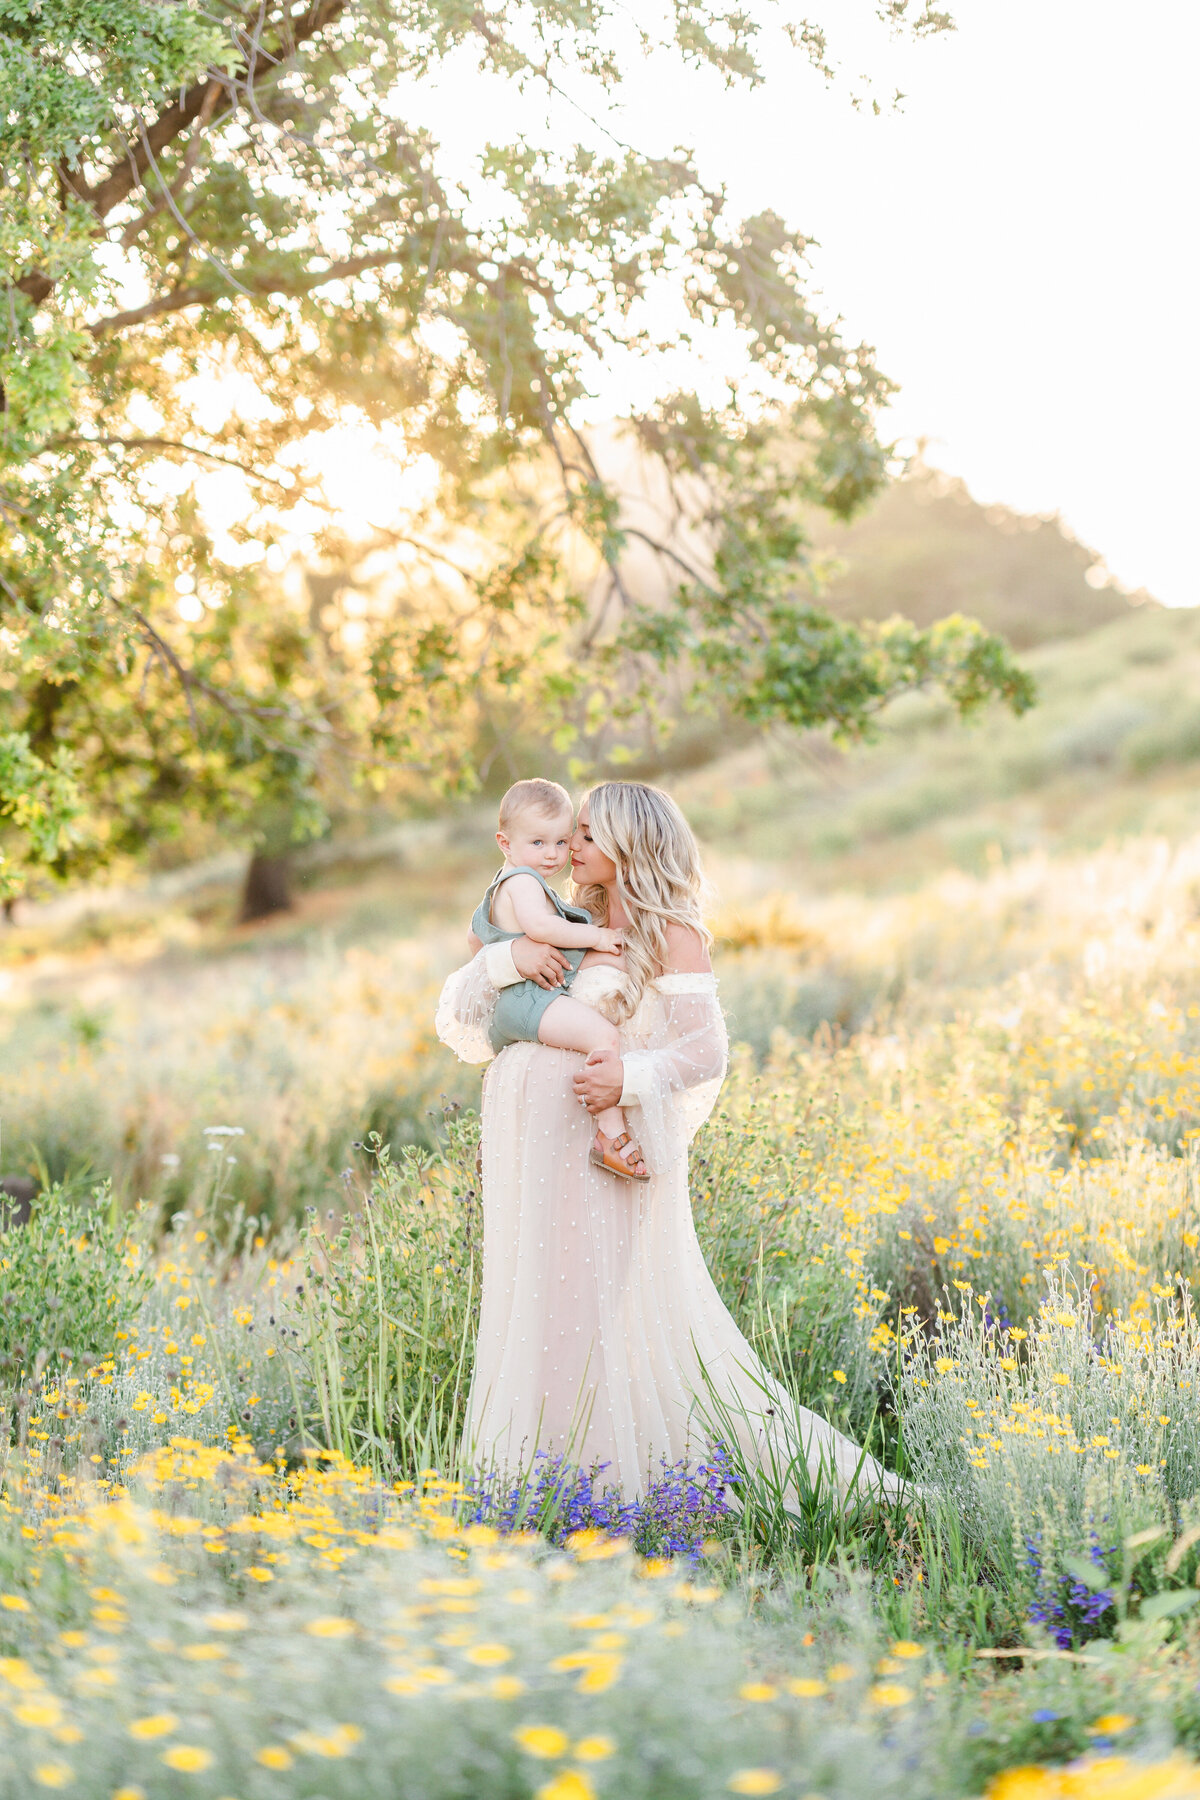 A maternity session photographed by Bay Area Photographer, Light Livin Photography shows a woman holding her toddler boy standing in a field of open flowers.